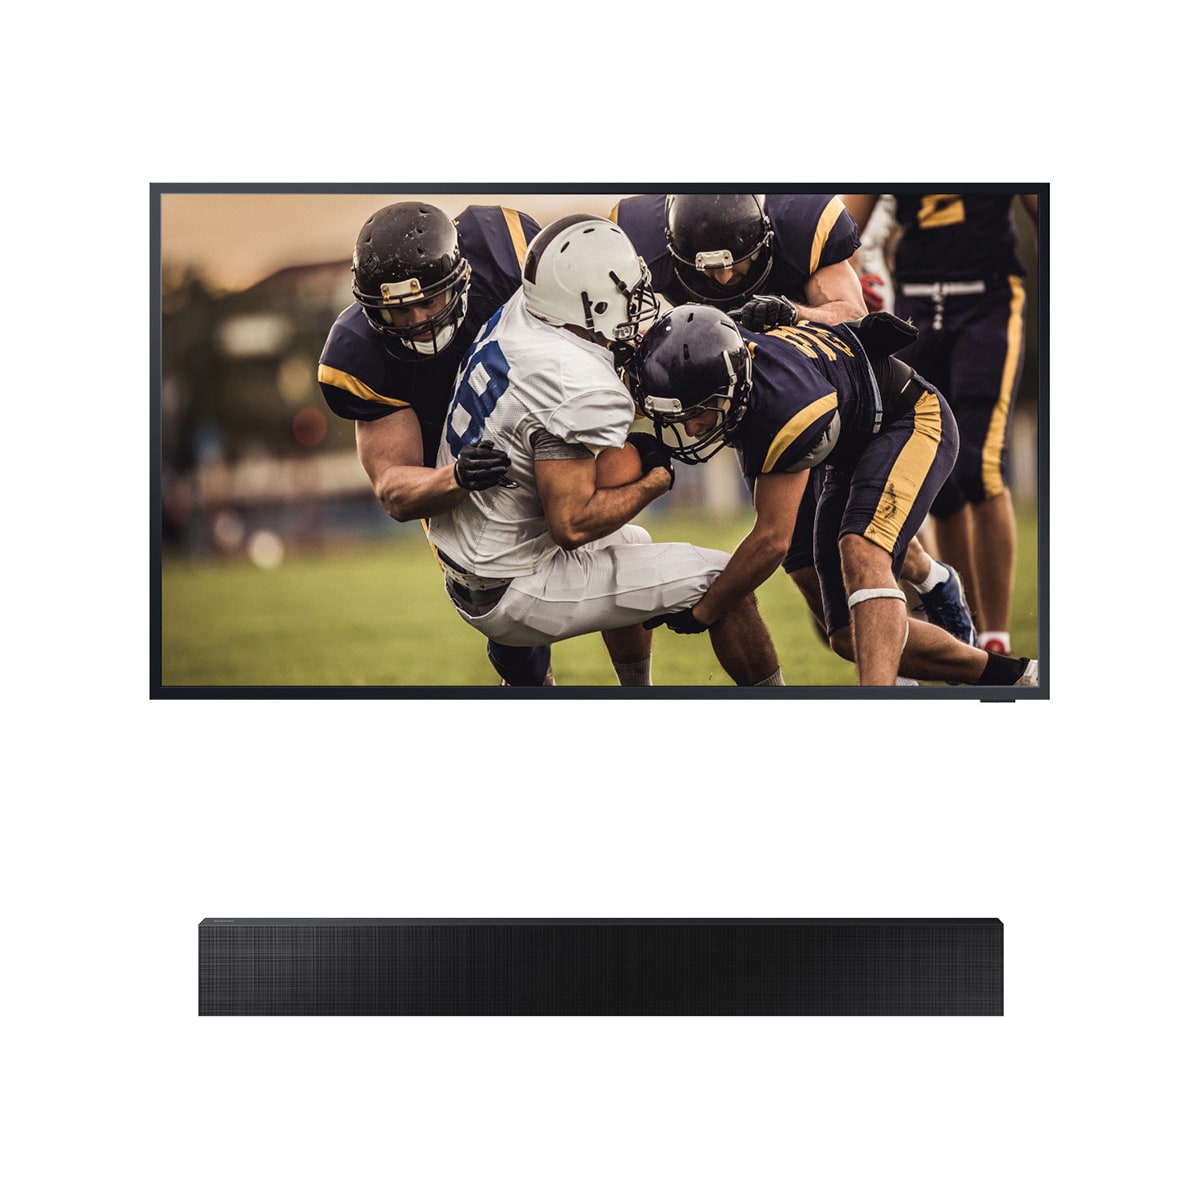 Samsung QN55LST7TA 55" The Terrace QLED 4K UHD Outdoor Smart TV with HW-LST70T The Terrace Sound Bar